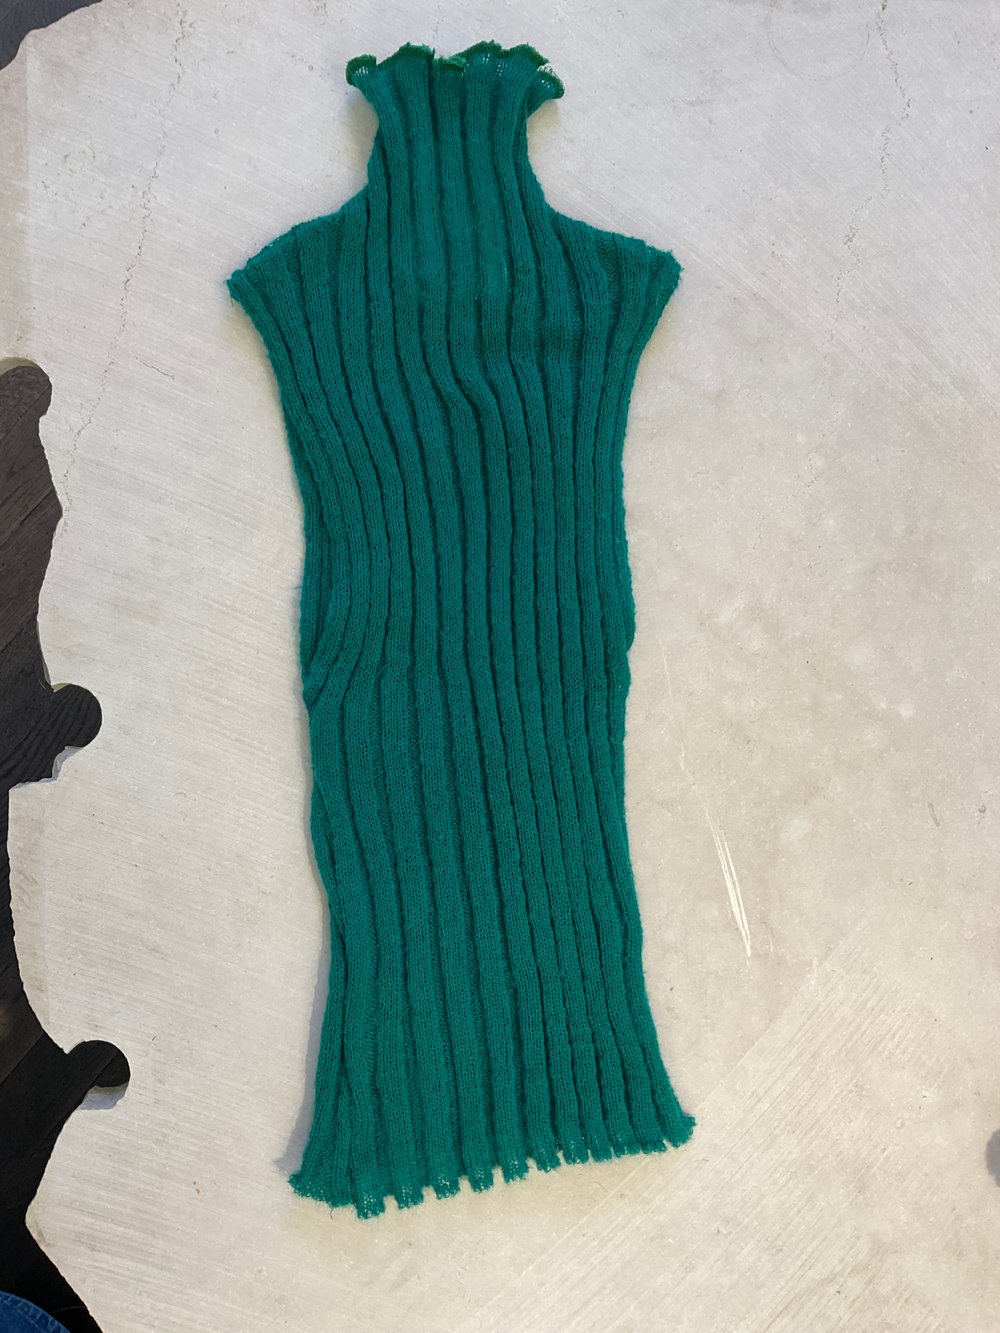 Mohair ribb knitted top dark green 